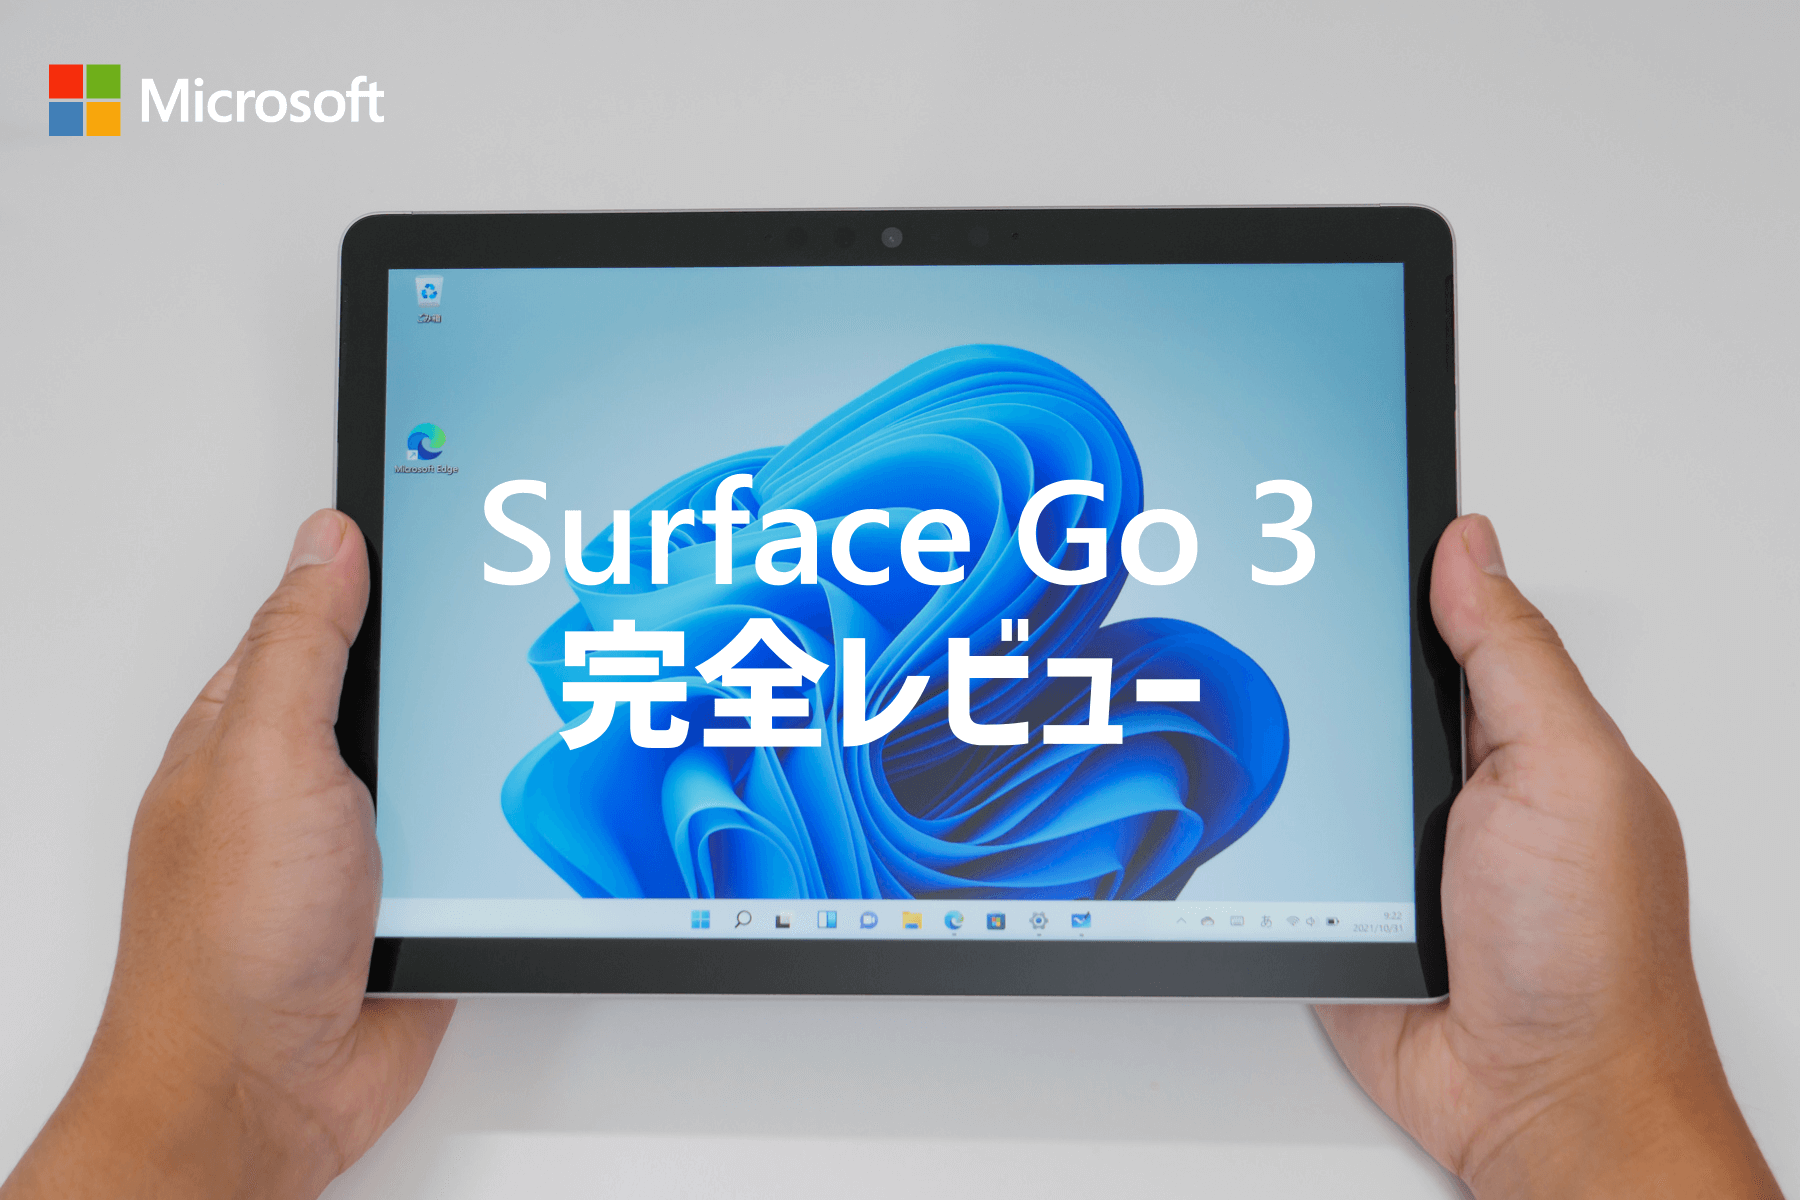 Surface Go 3 実機レビュー。メリット・デメリットを把握すれば使い勝手の良い端末として評価できる